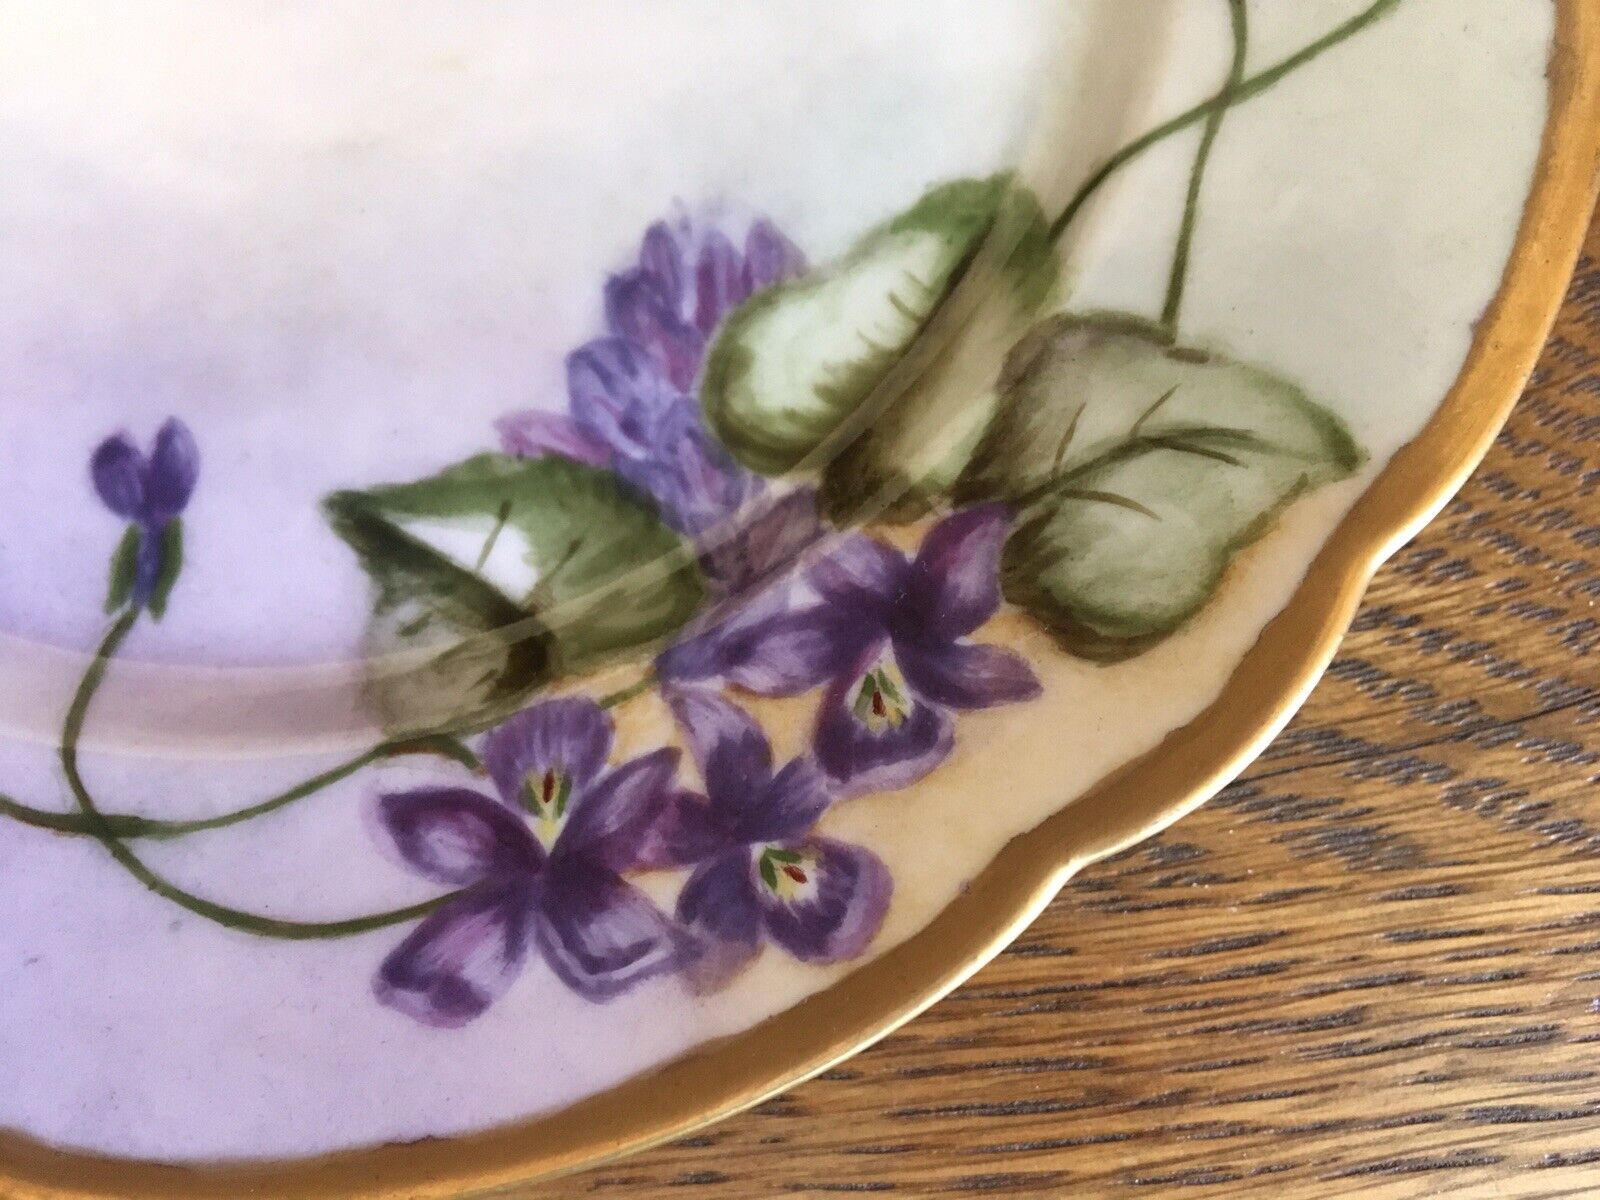 Antique Plate Handpainted Violets Artist Initialed & Dated 1909 impressed “TK”